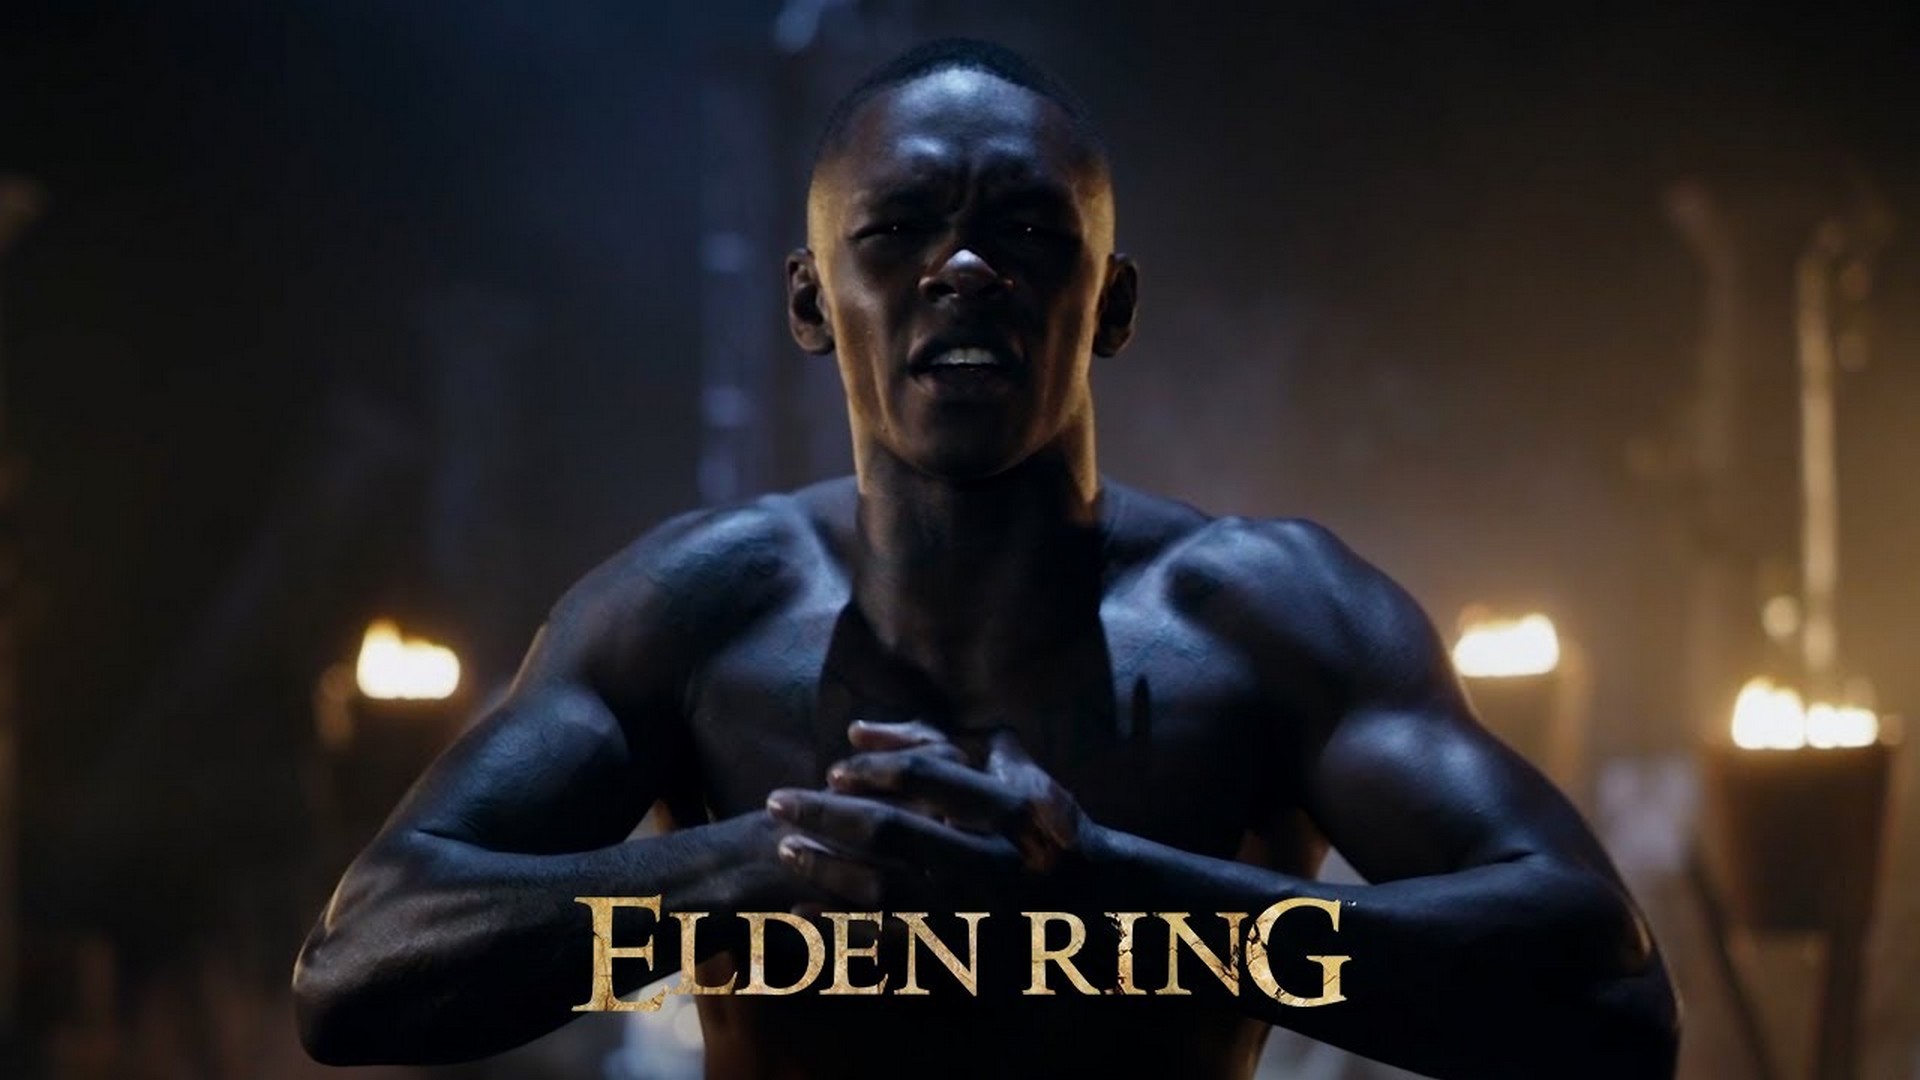 Fighting Great Israel Adesanya Tells Players “When You Fall, Don’t Lose Faith” In All-New Elden Ring Trailer